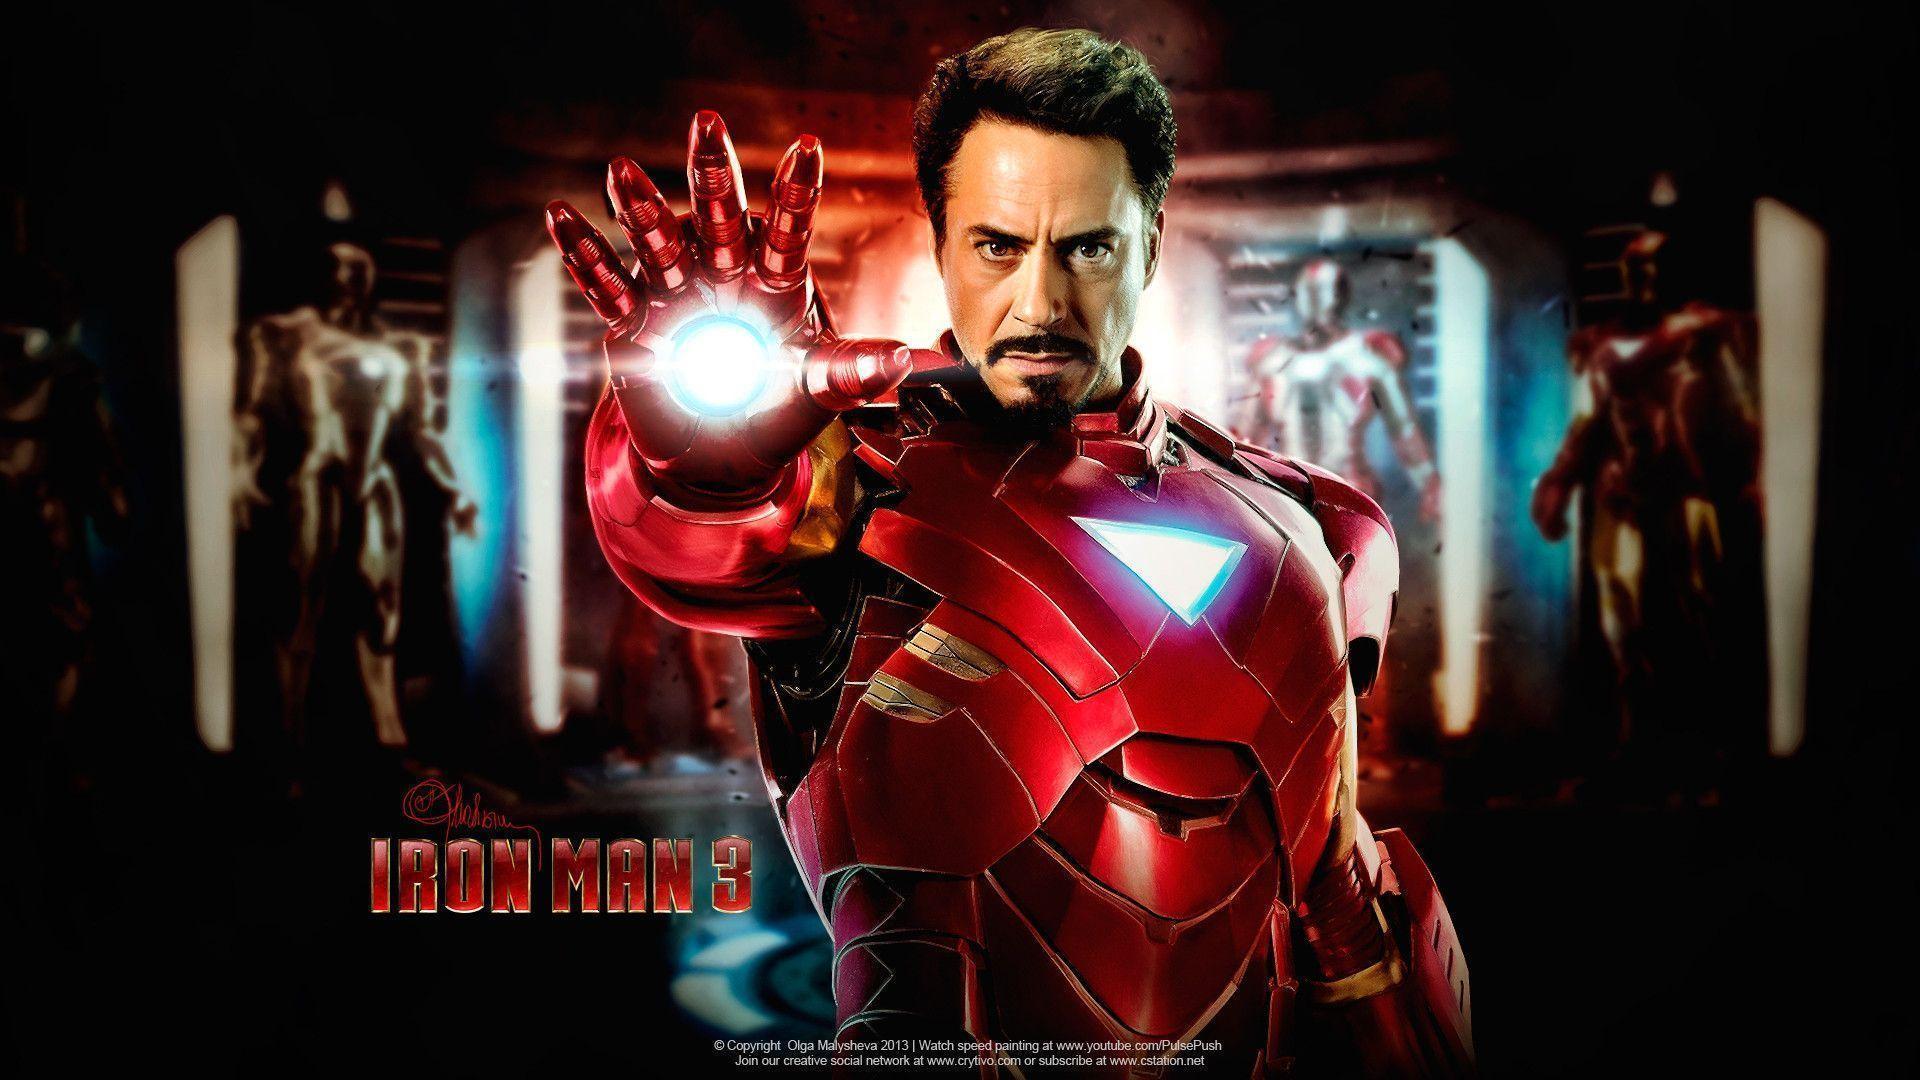 HD Wallpaper Iron Man 3 In Action Scenic Image Wallpaper